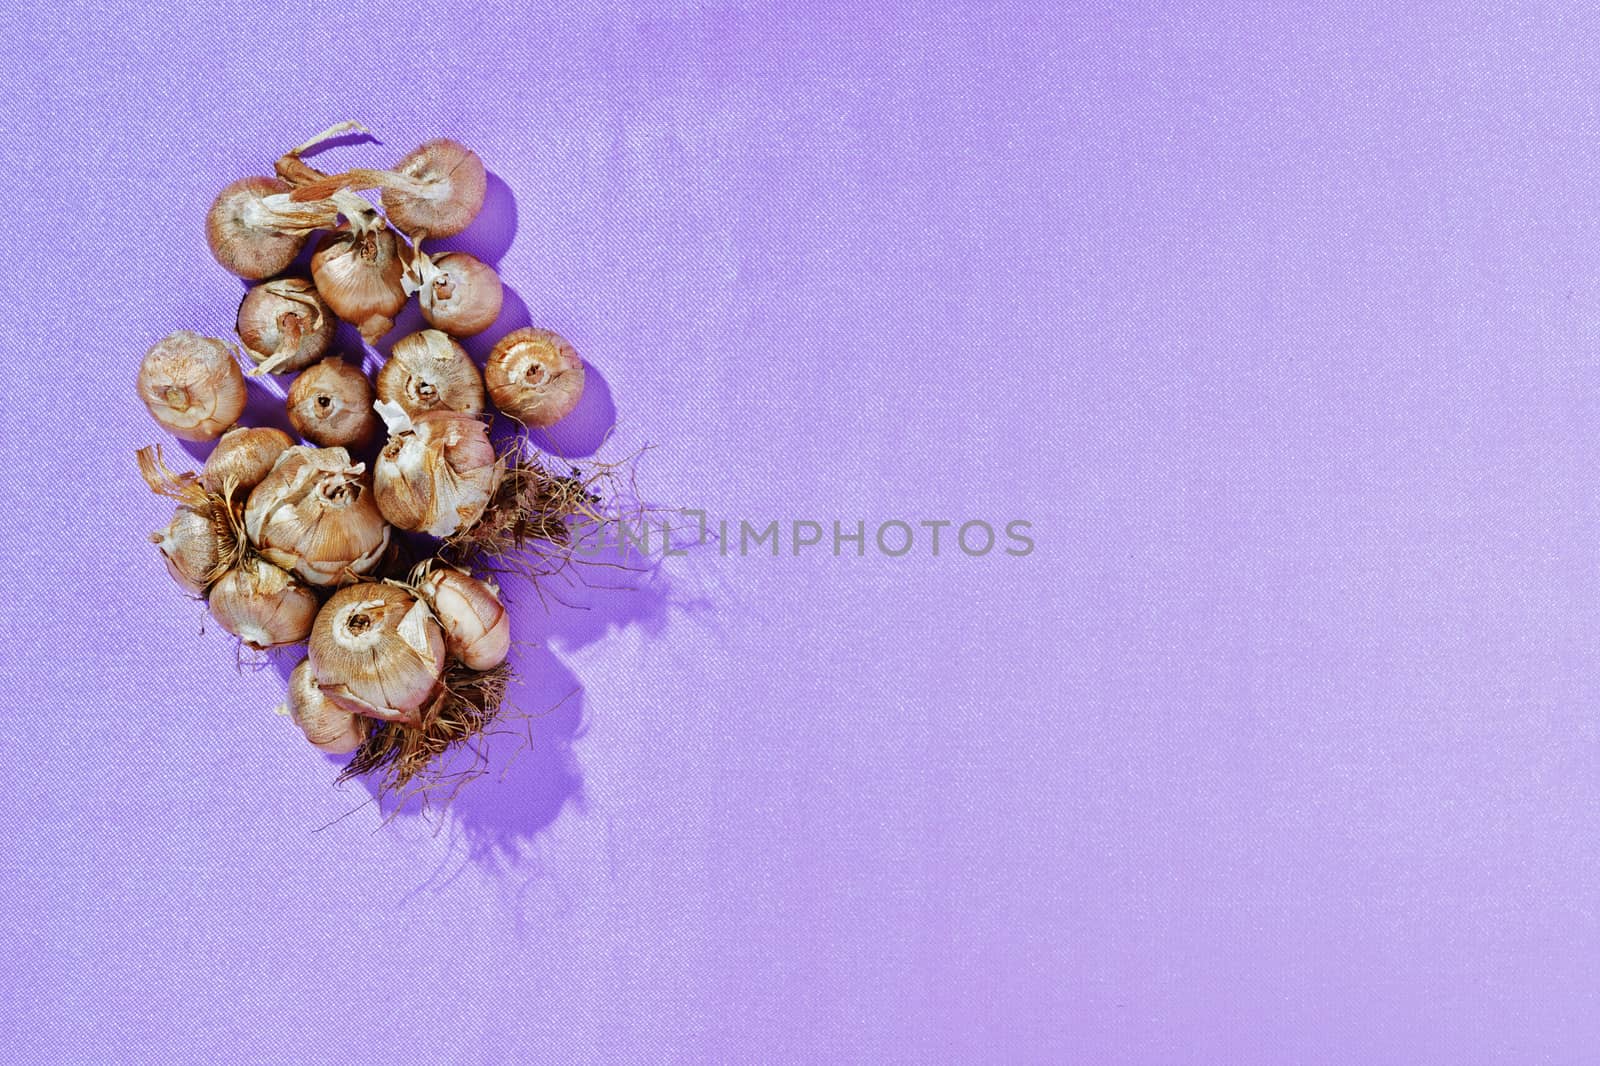 Group of small brown bulbs of iris flower on violet background